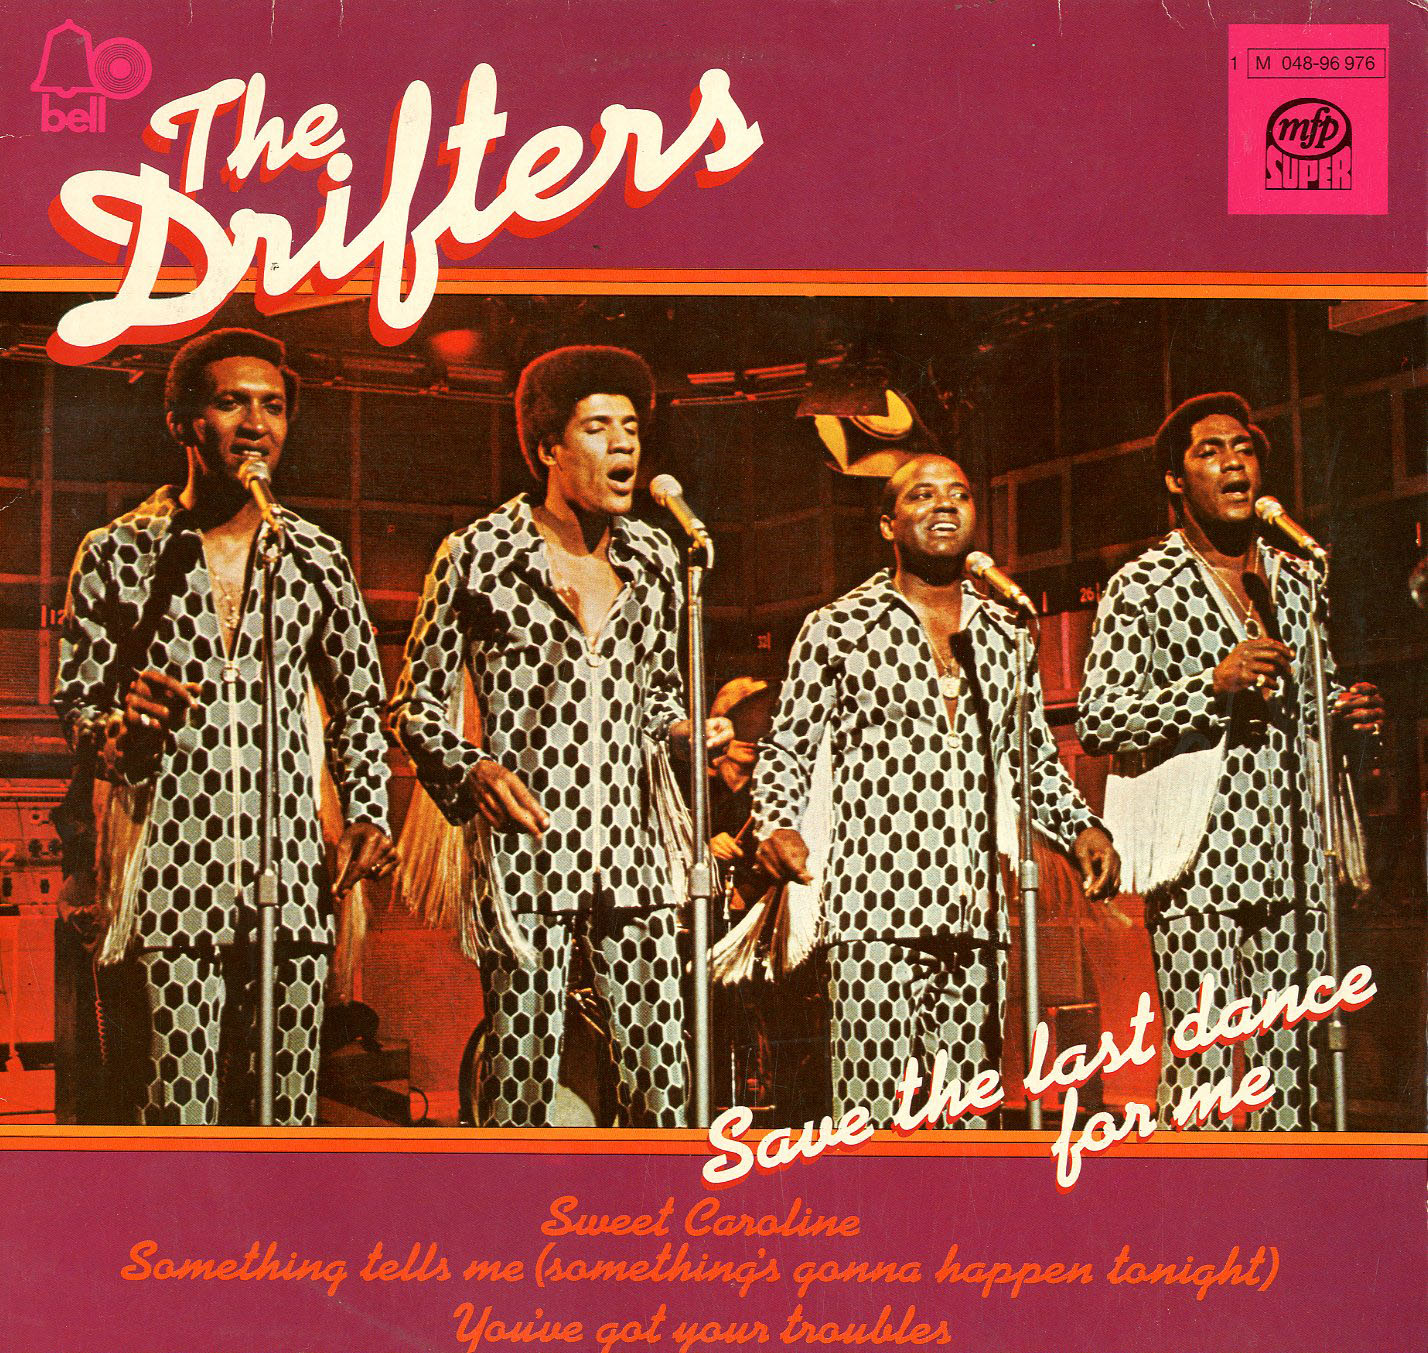 Albumcover The Drifters - Save The Last Dance For Me